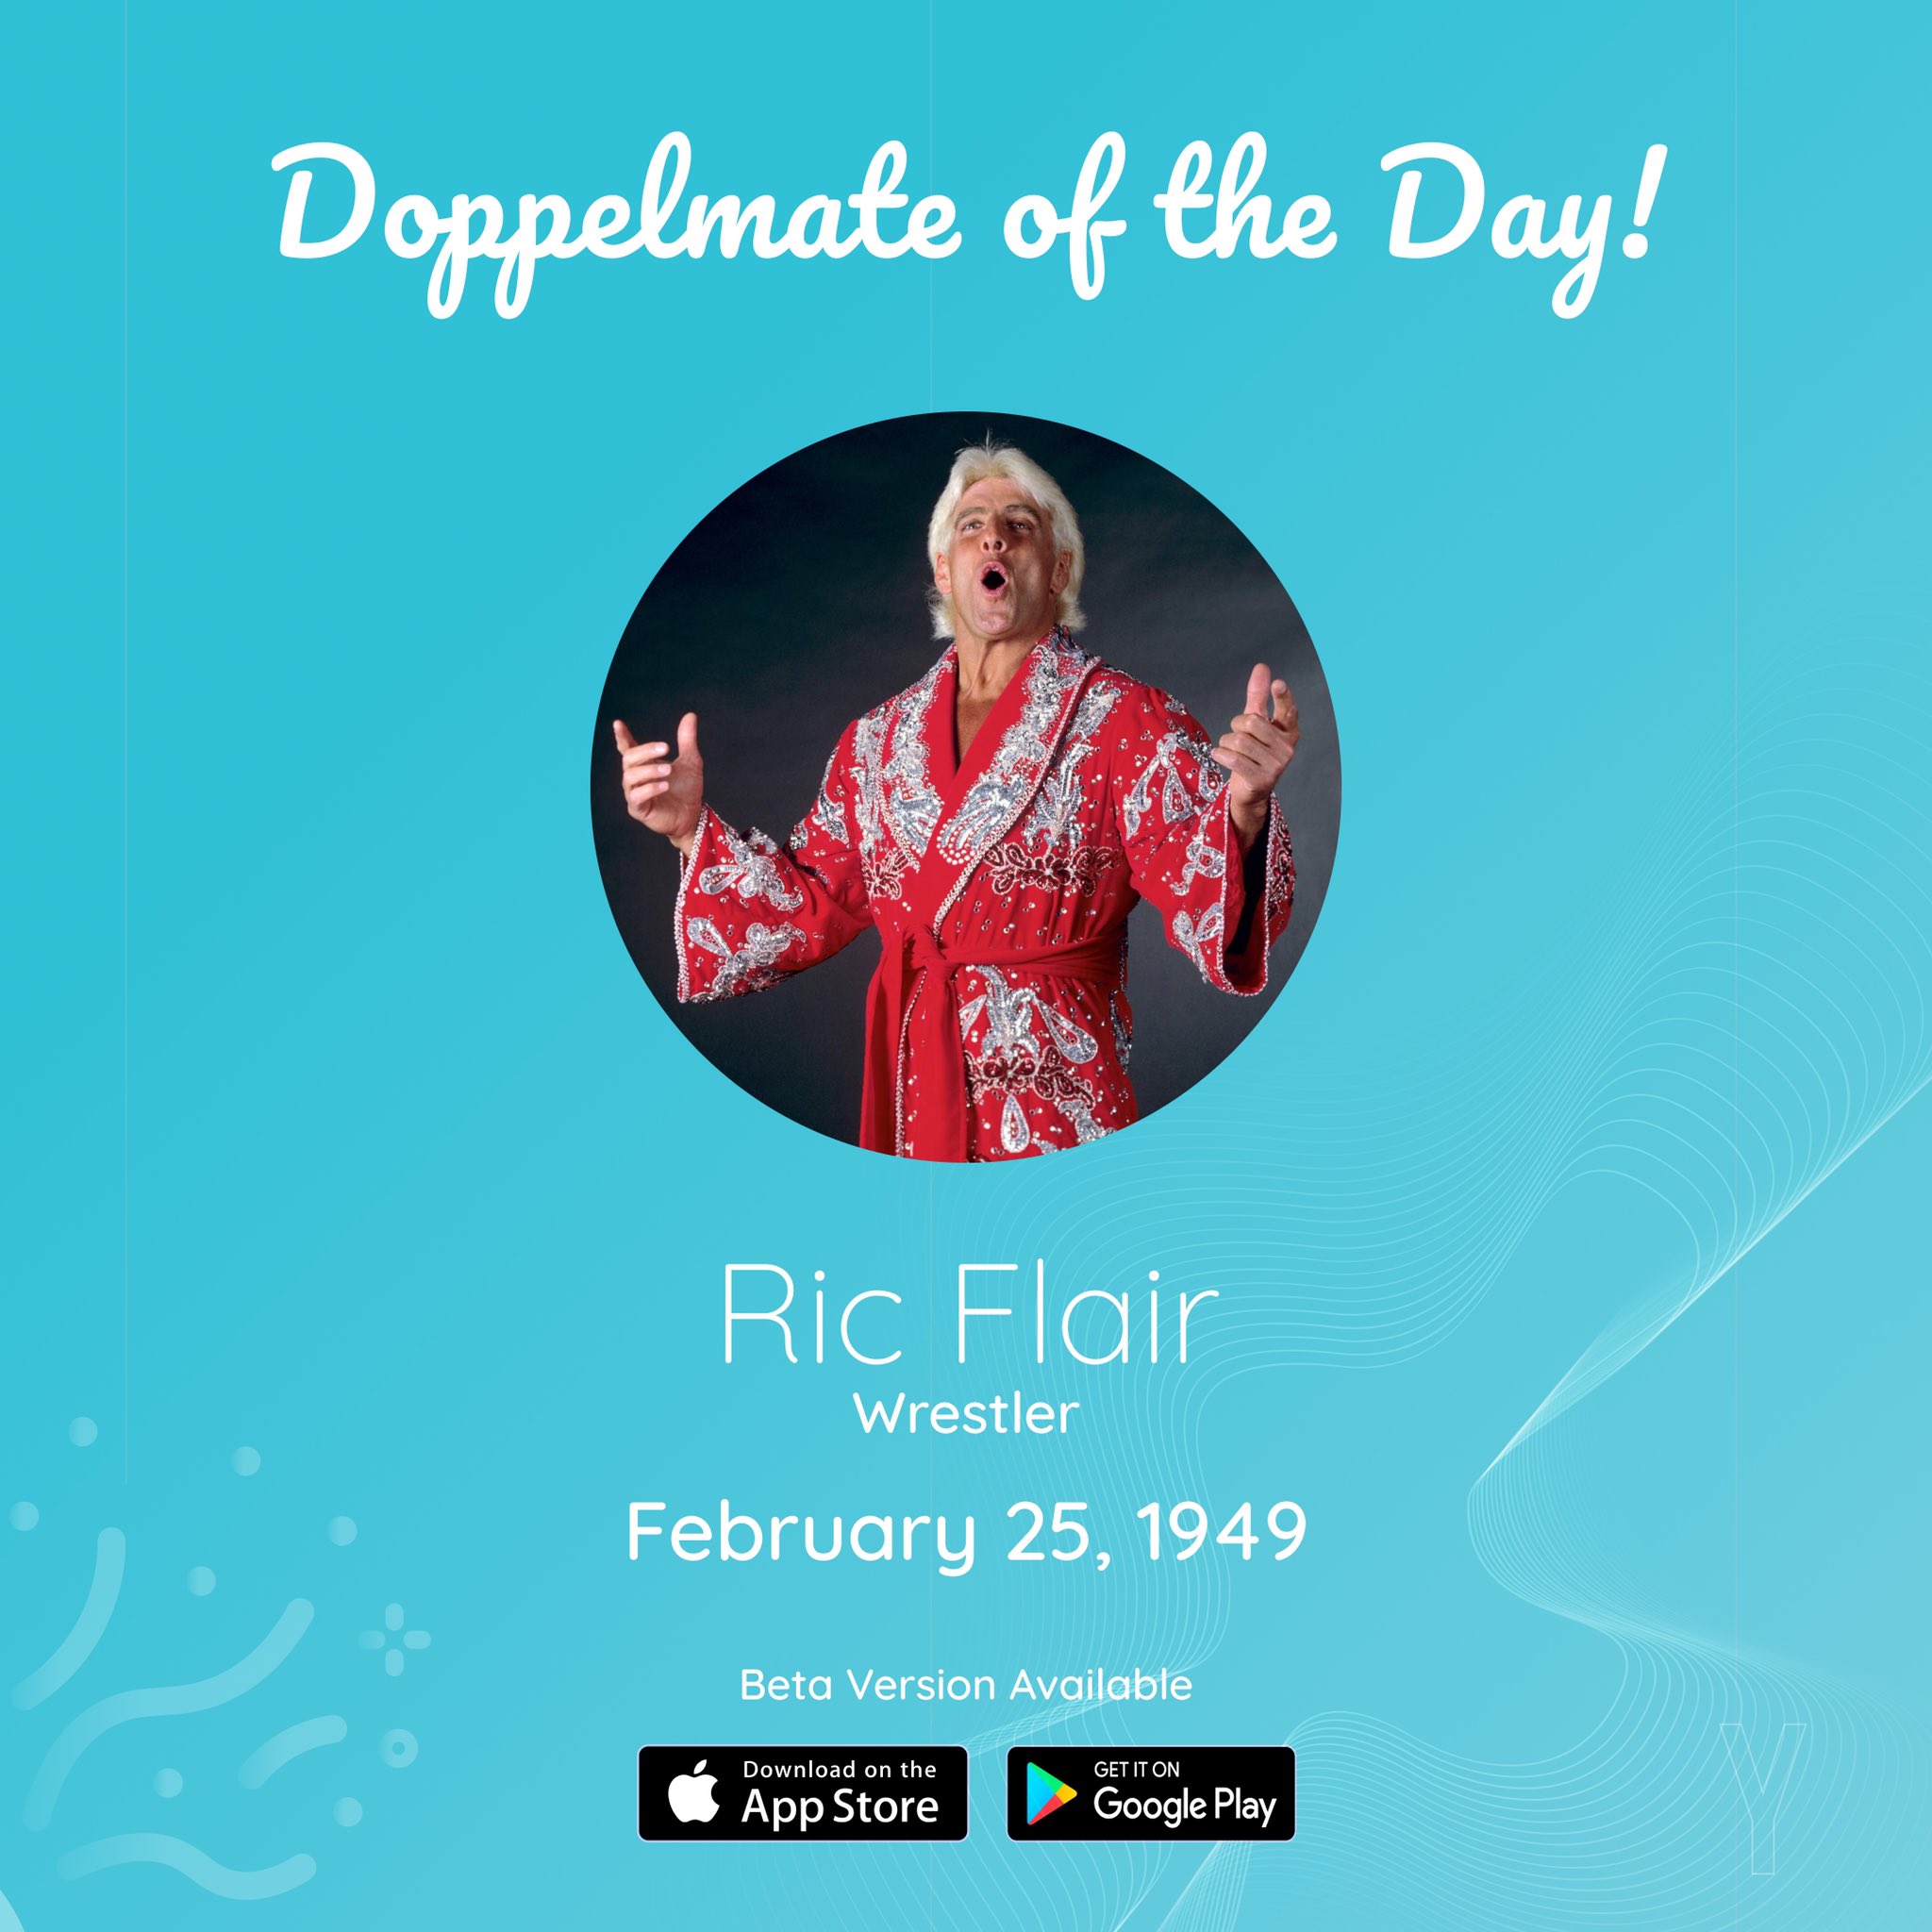 Happy Birthday, Ric Flair Visit our website to try the Beta App!     